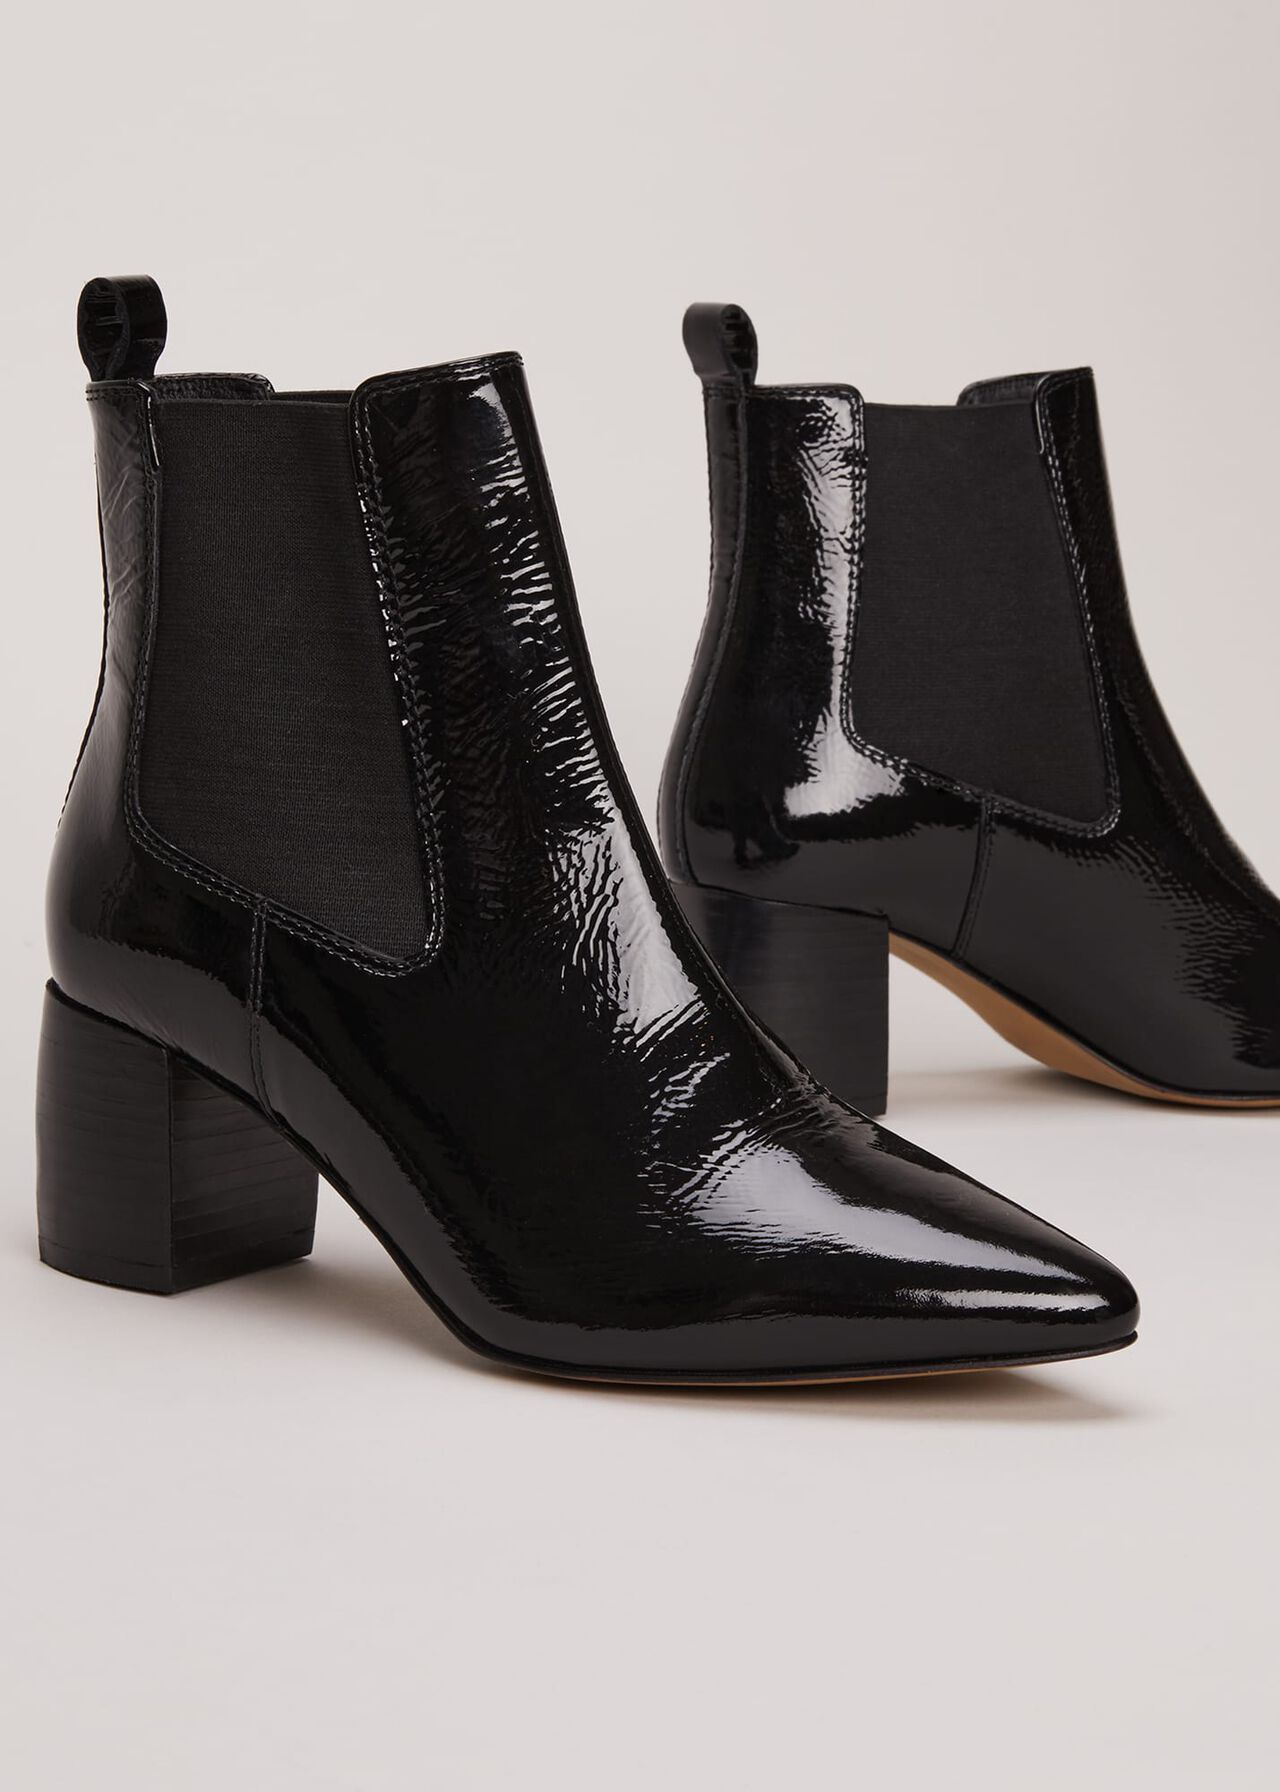 Black Leather Patent Ankle Boots